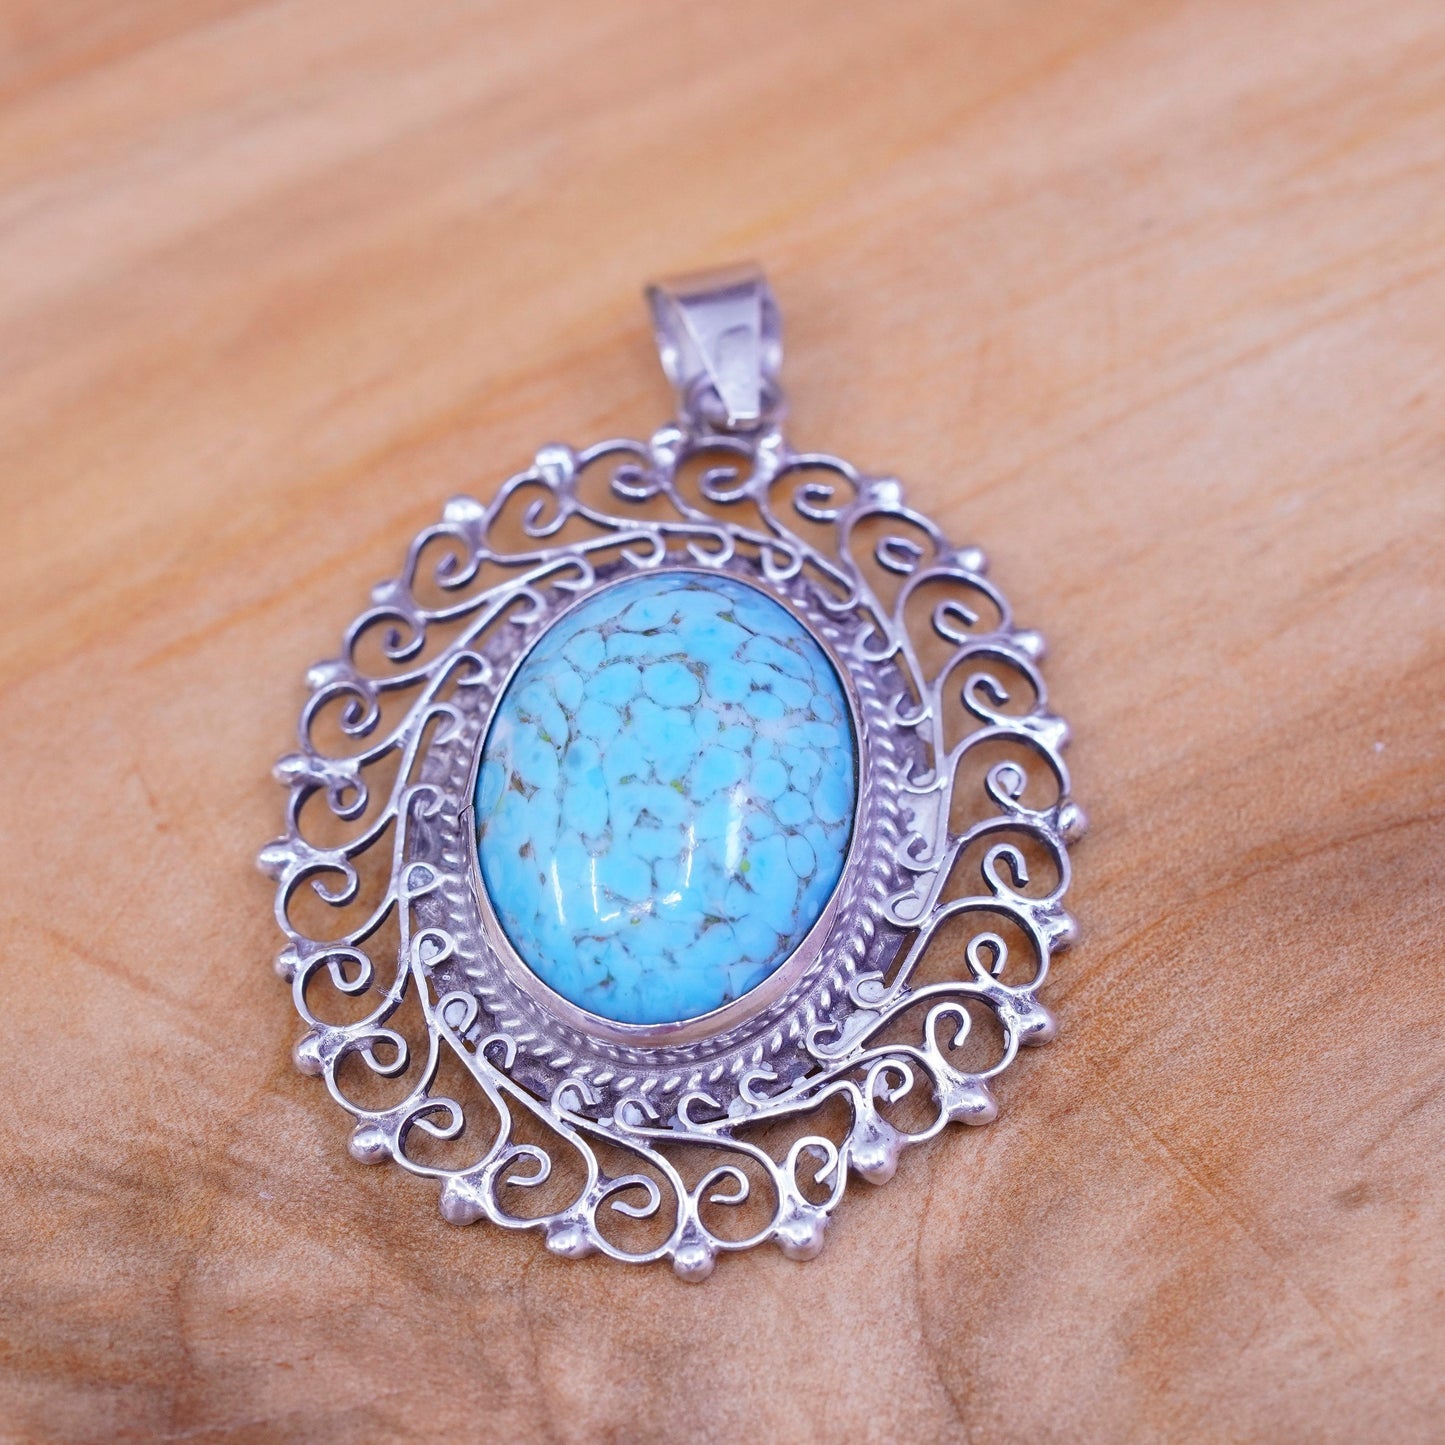 Sterling silver handmade pendant, bali style 925 filigree trim oval turquoise